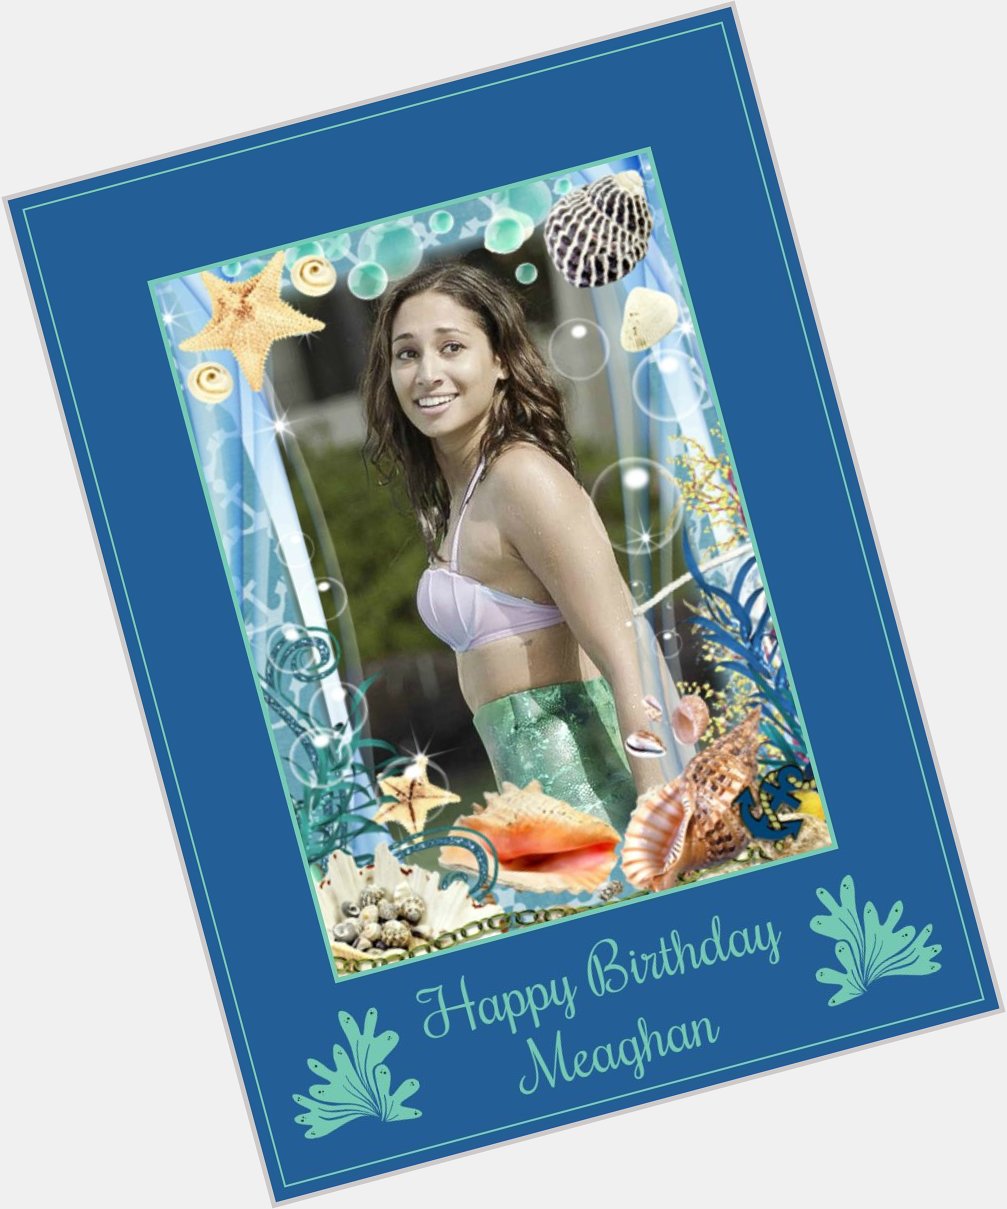 Happy birthday to  - Meaghan Rath

\"Mermaid: A sea woman who chooses Imagination over Fear\" 